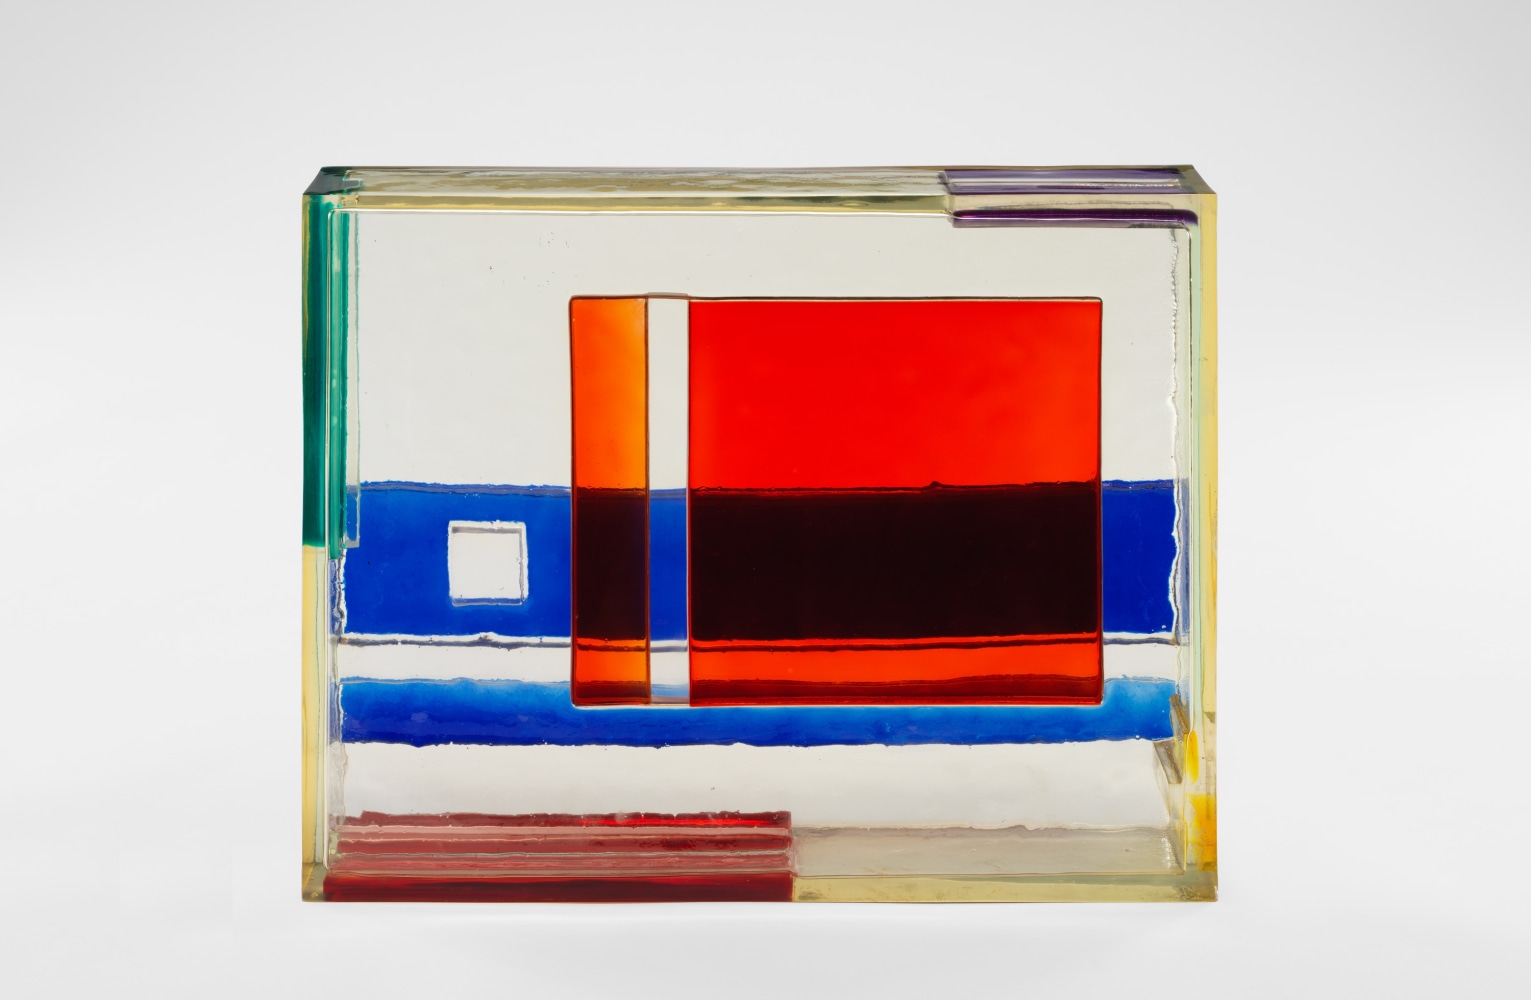 Leo Amino (1911 –1989)  Refractional #75,  1972  Polyester resin  11.89 x 14.88 x 2.99 inches  30.2 x 37.8 x 7.6 cm